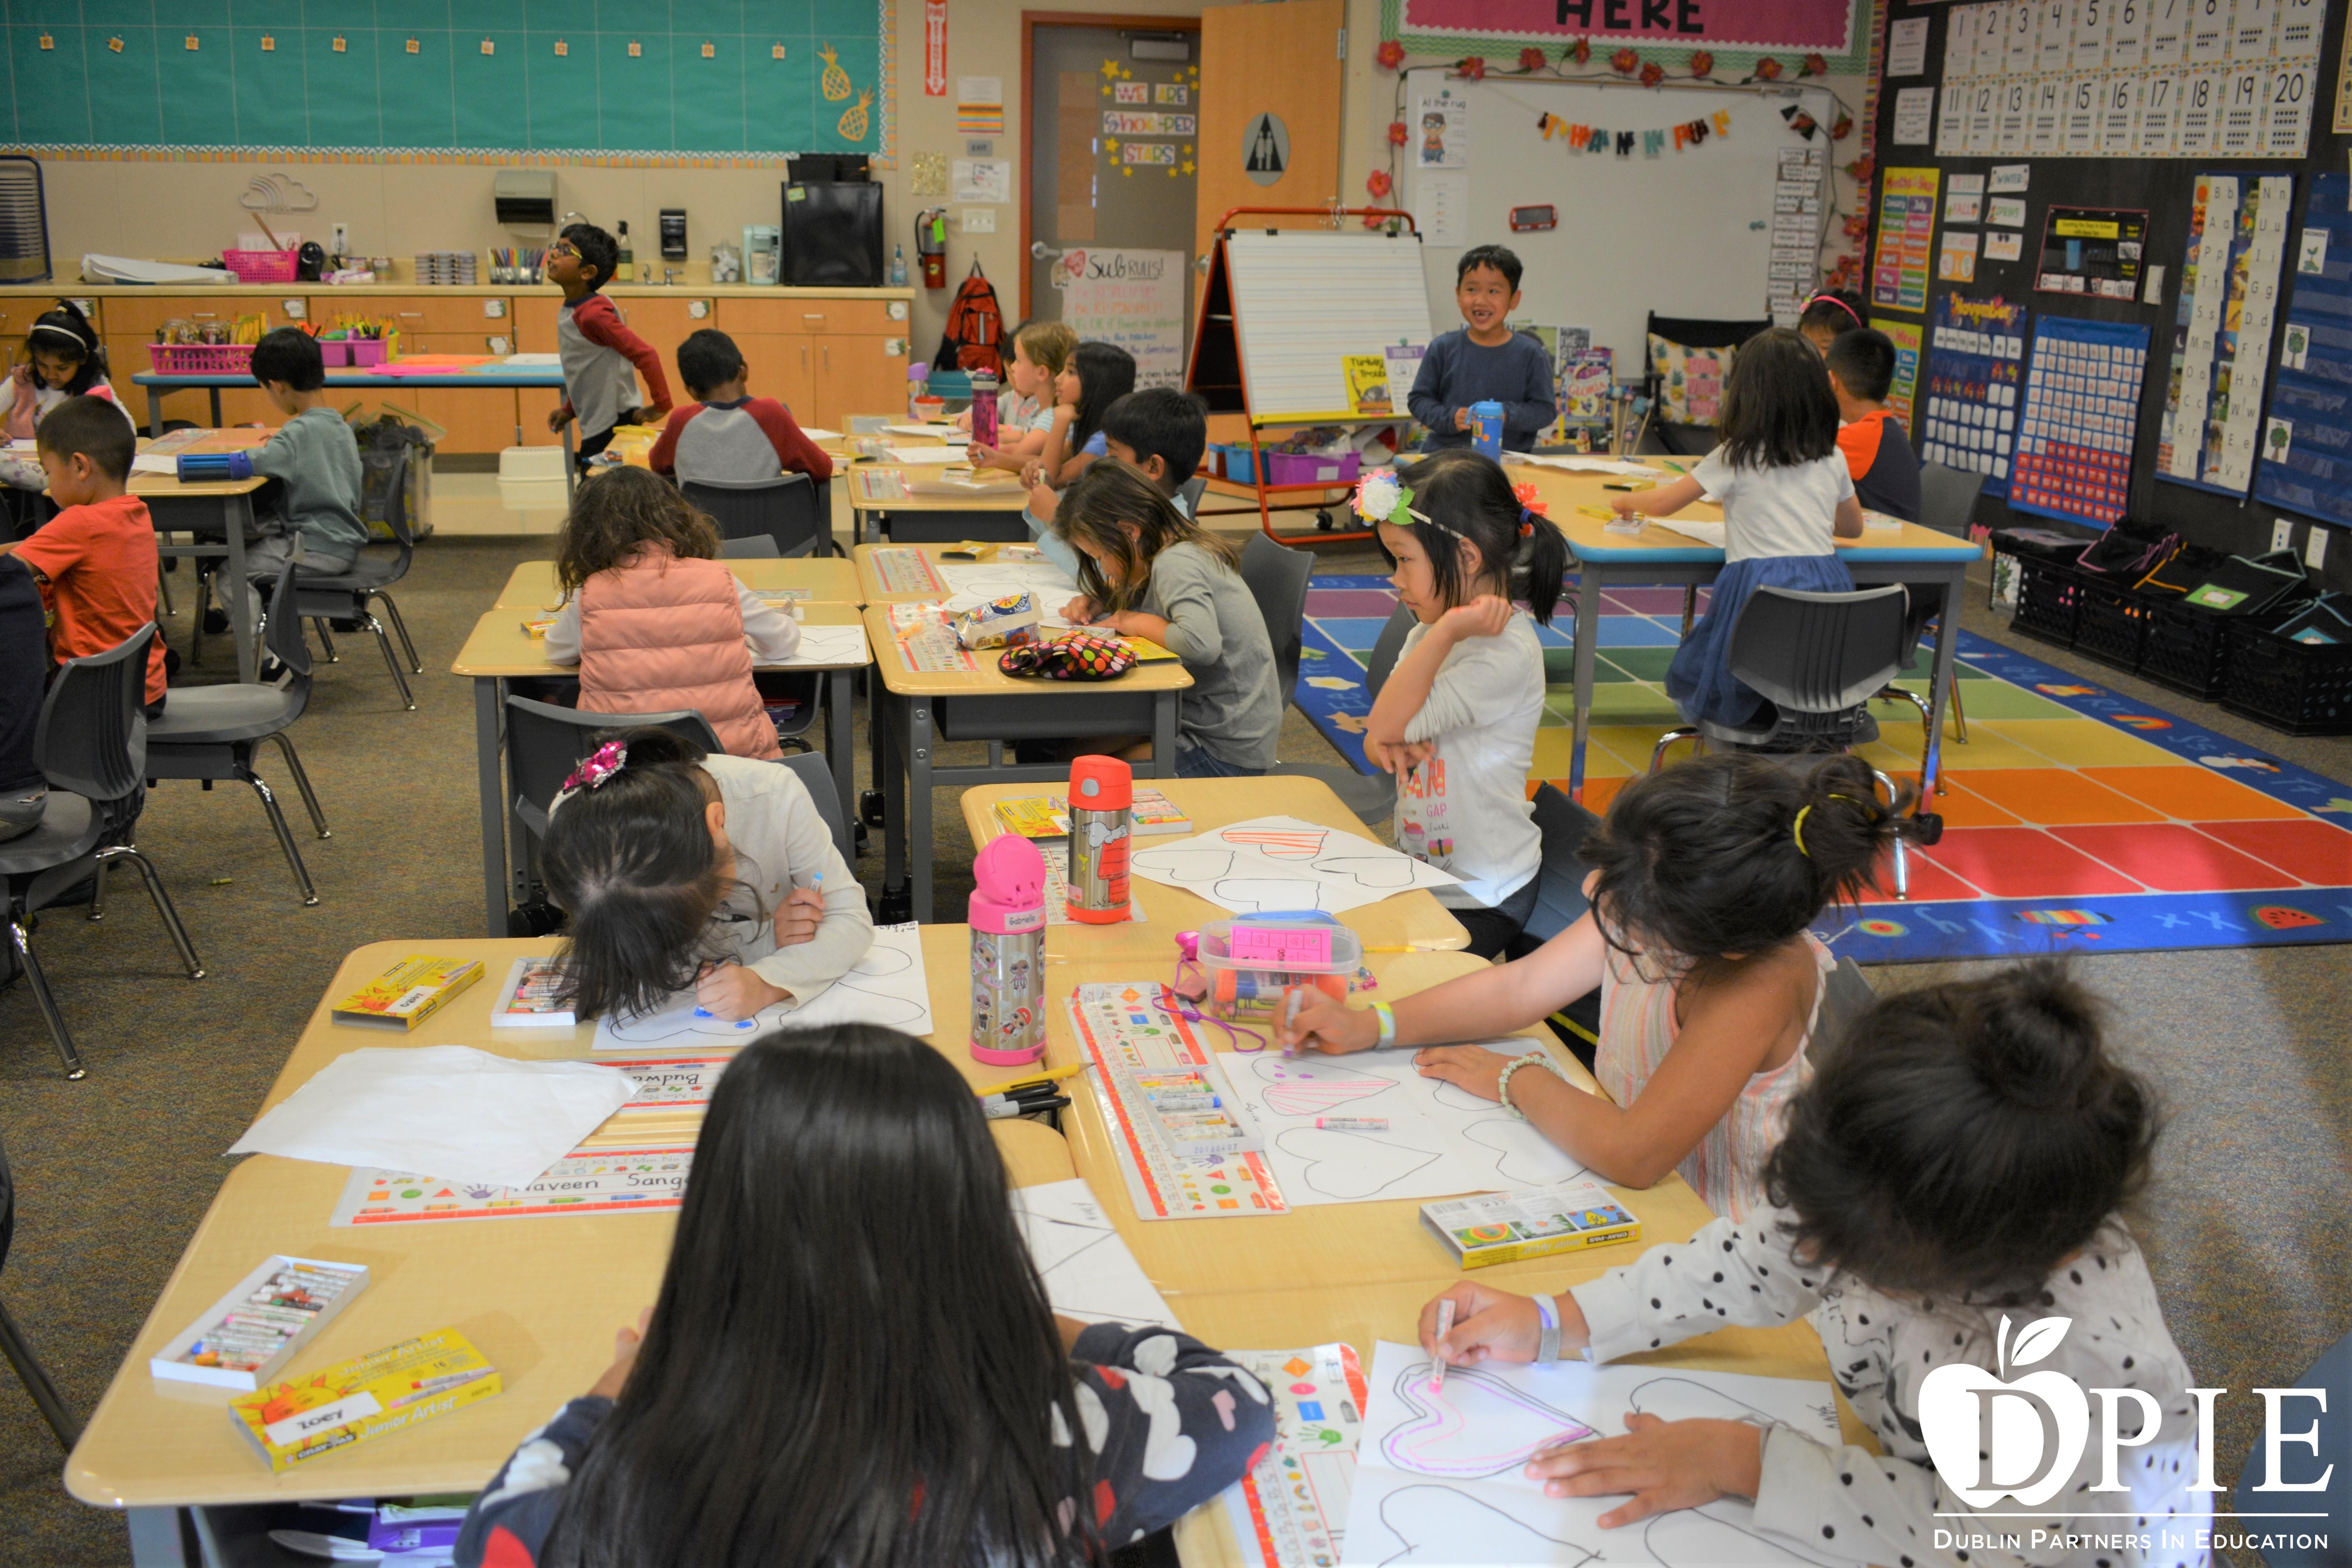 Ms McCrory's Oodles of Doodles class at Amador Elementary